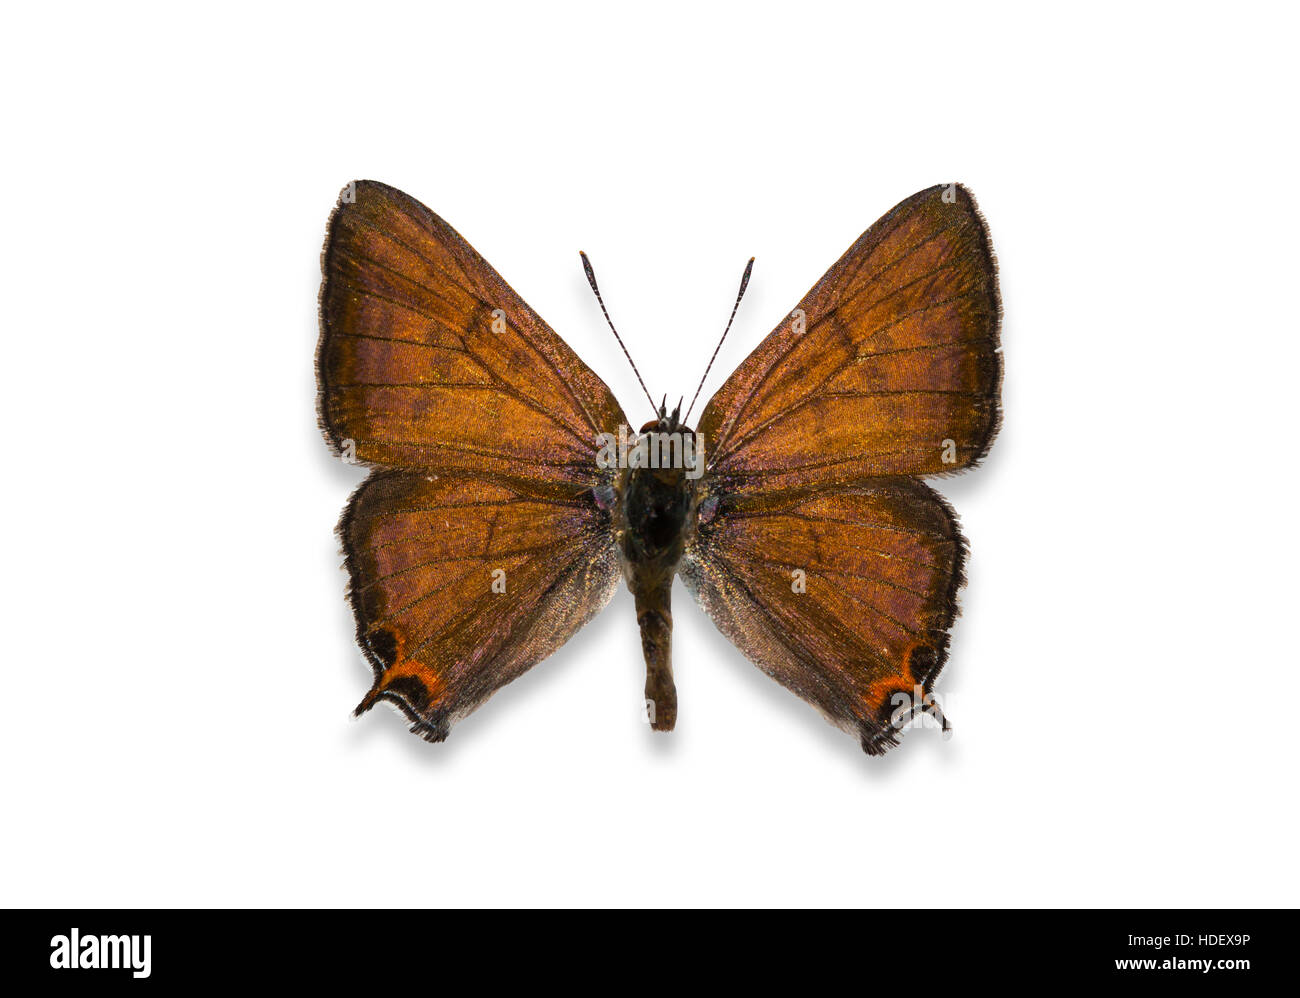 A pinned and spread cutout male Tailed Copper butterfly (Lycaena arota) on a white background Stock Photo